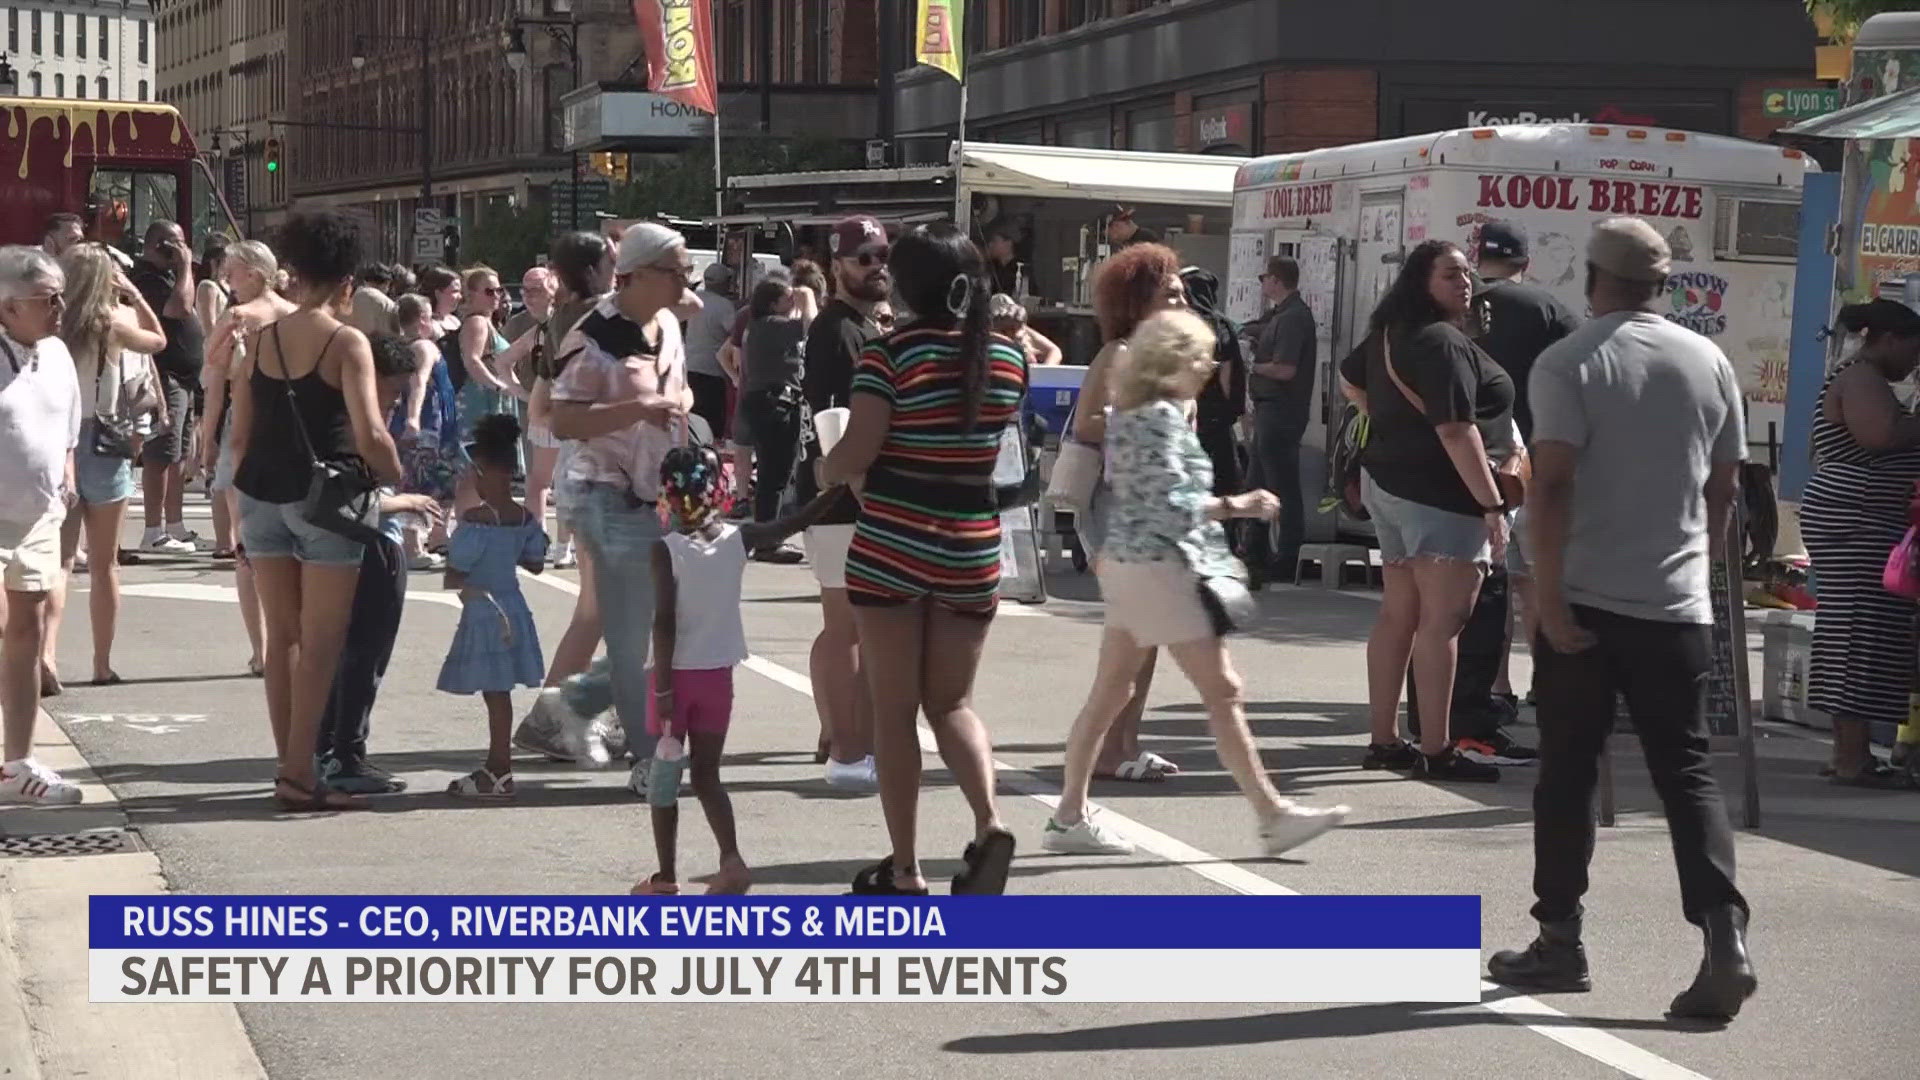 Event organizers are expecting thousands of people to attend Fourth of July events this year, and say events will go on with everyone's safety in mind.